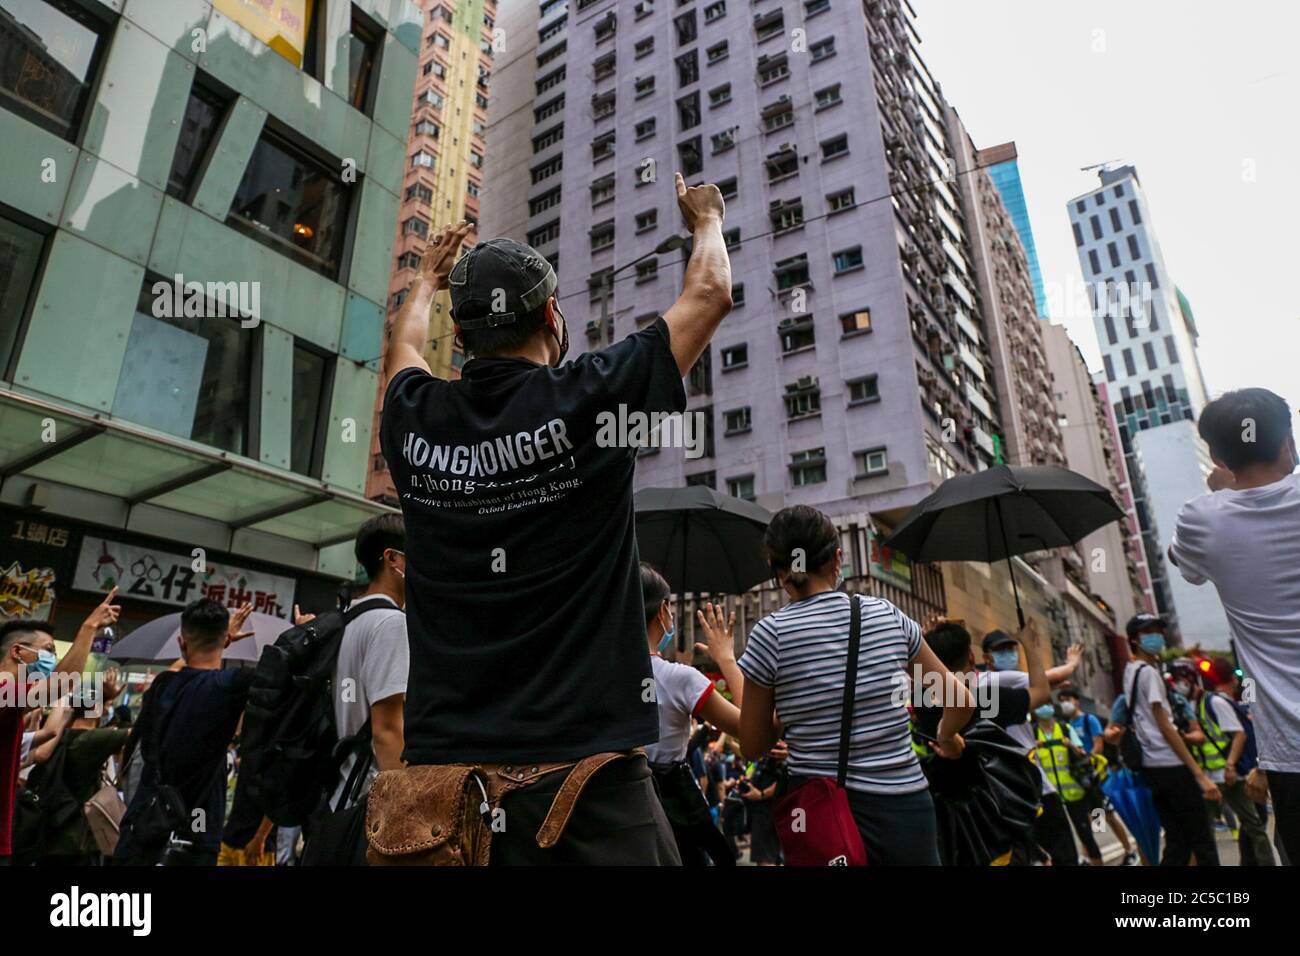 A man wearing a 'Hongkonger' shirt makes a 'Five Demands, Not One Less.' gesture during demonstrations. The National Security Law is a piece of legislation introduced by Beijing for Hong Kong. Composed of 66 articles that were in complete secrecy until after it was passed, it criminalizes any acts of secession, subversion, terrorism and collusion with foreign or external forces with a maximum sentence of life in prison. The law officially came into effect at 11pm on June 30, 2020 - the evening before the 23rd anniversary of Hong Kong's handover from Britain back to China. On July 1, thousands Stock Photo